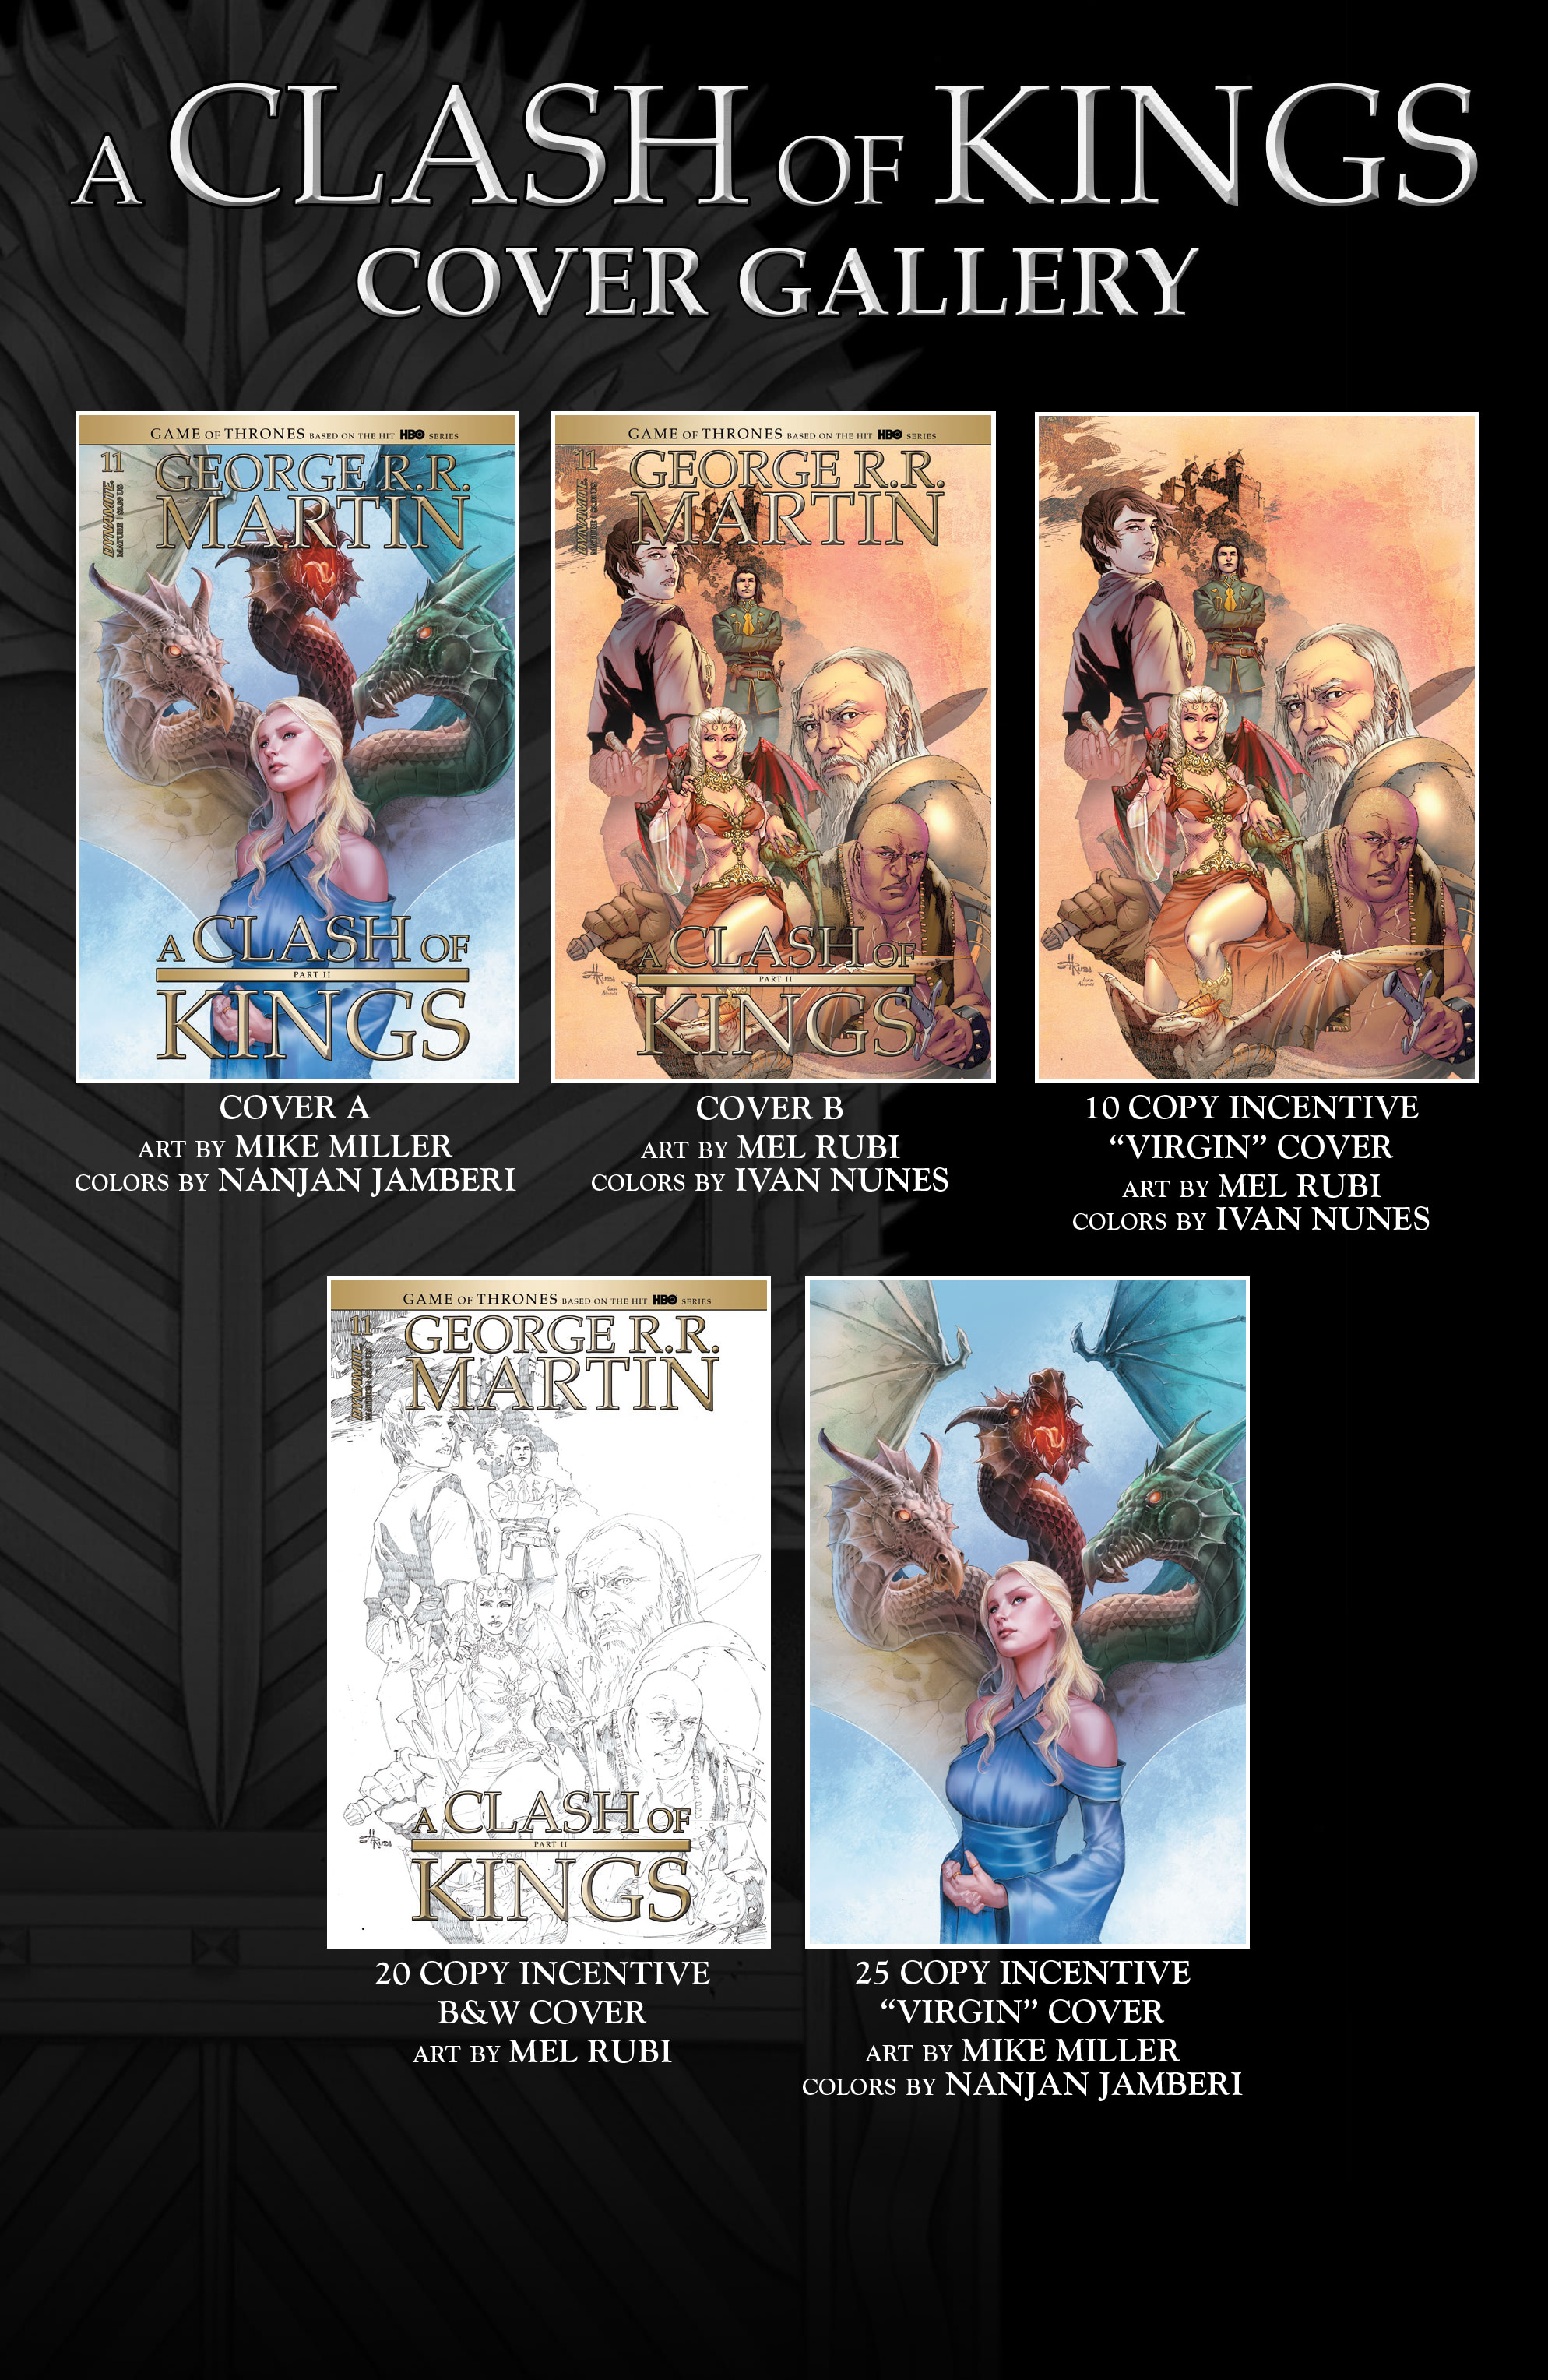 GEORGE R.R. MARTIN'S A CLASH OF KINGS (VOL. 2) #11 Preview